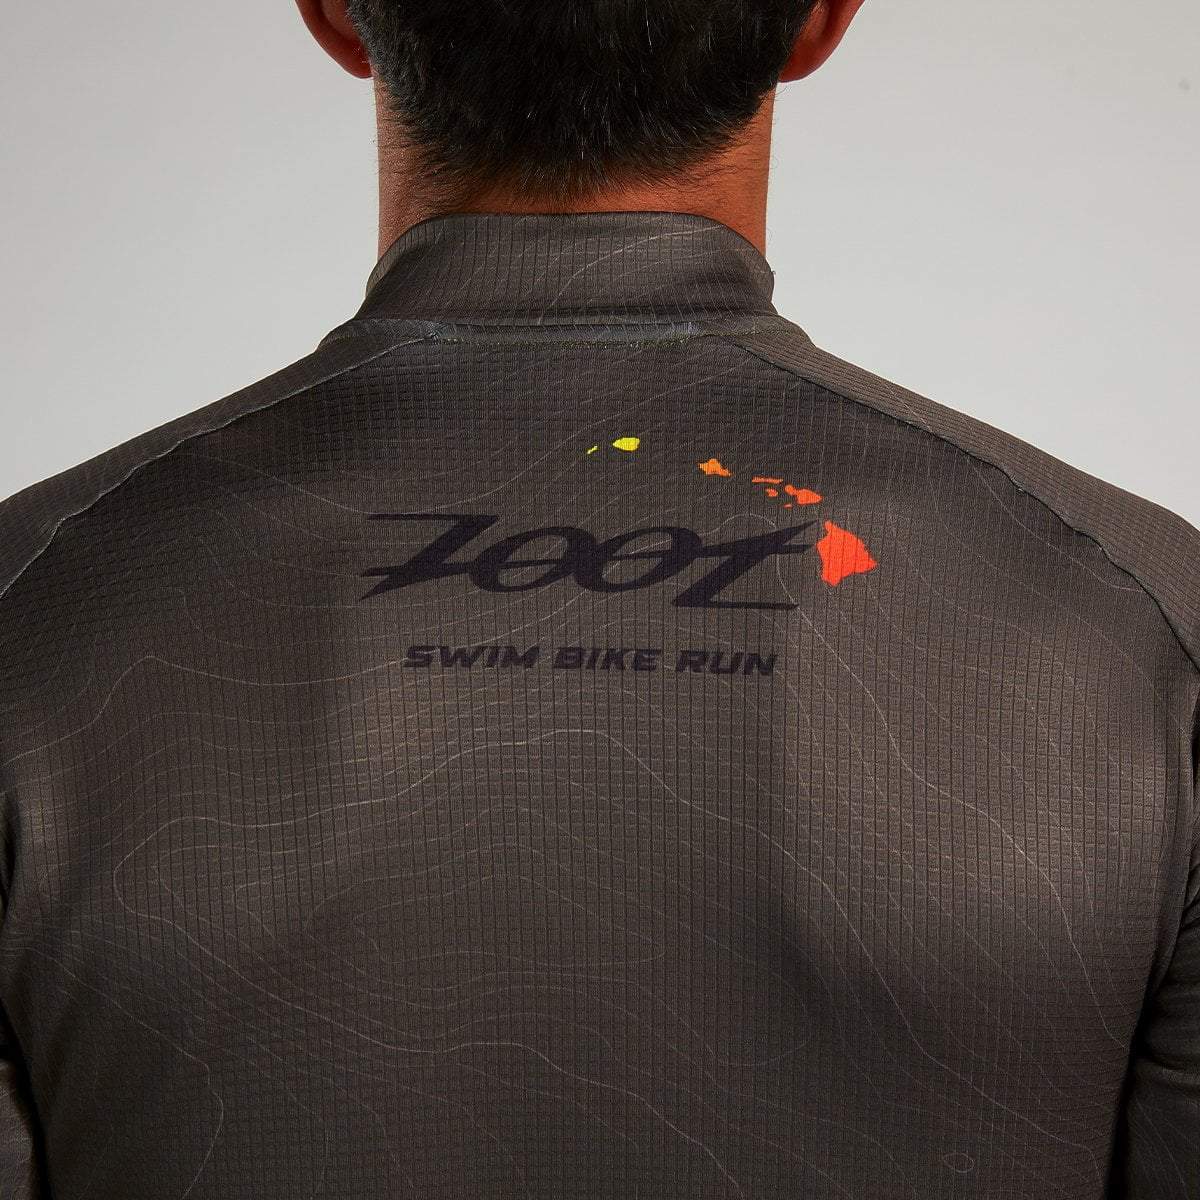 Zoot Sports Cycle Apparel Mens LTD Cycle Thermo Jersey - Mahalo